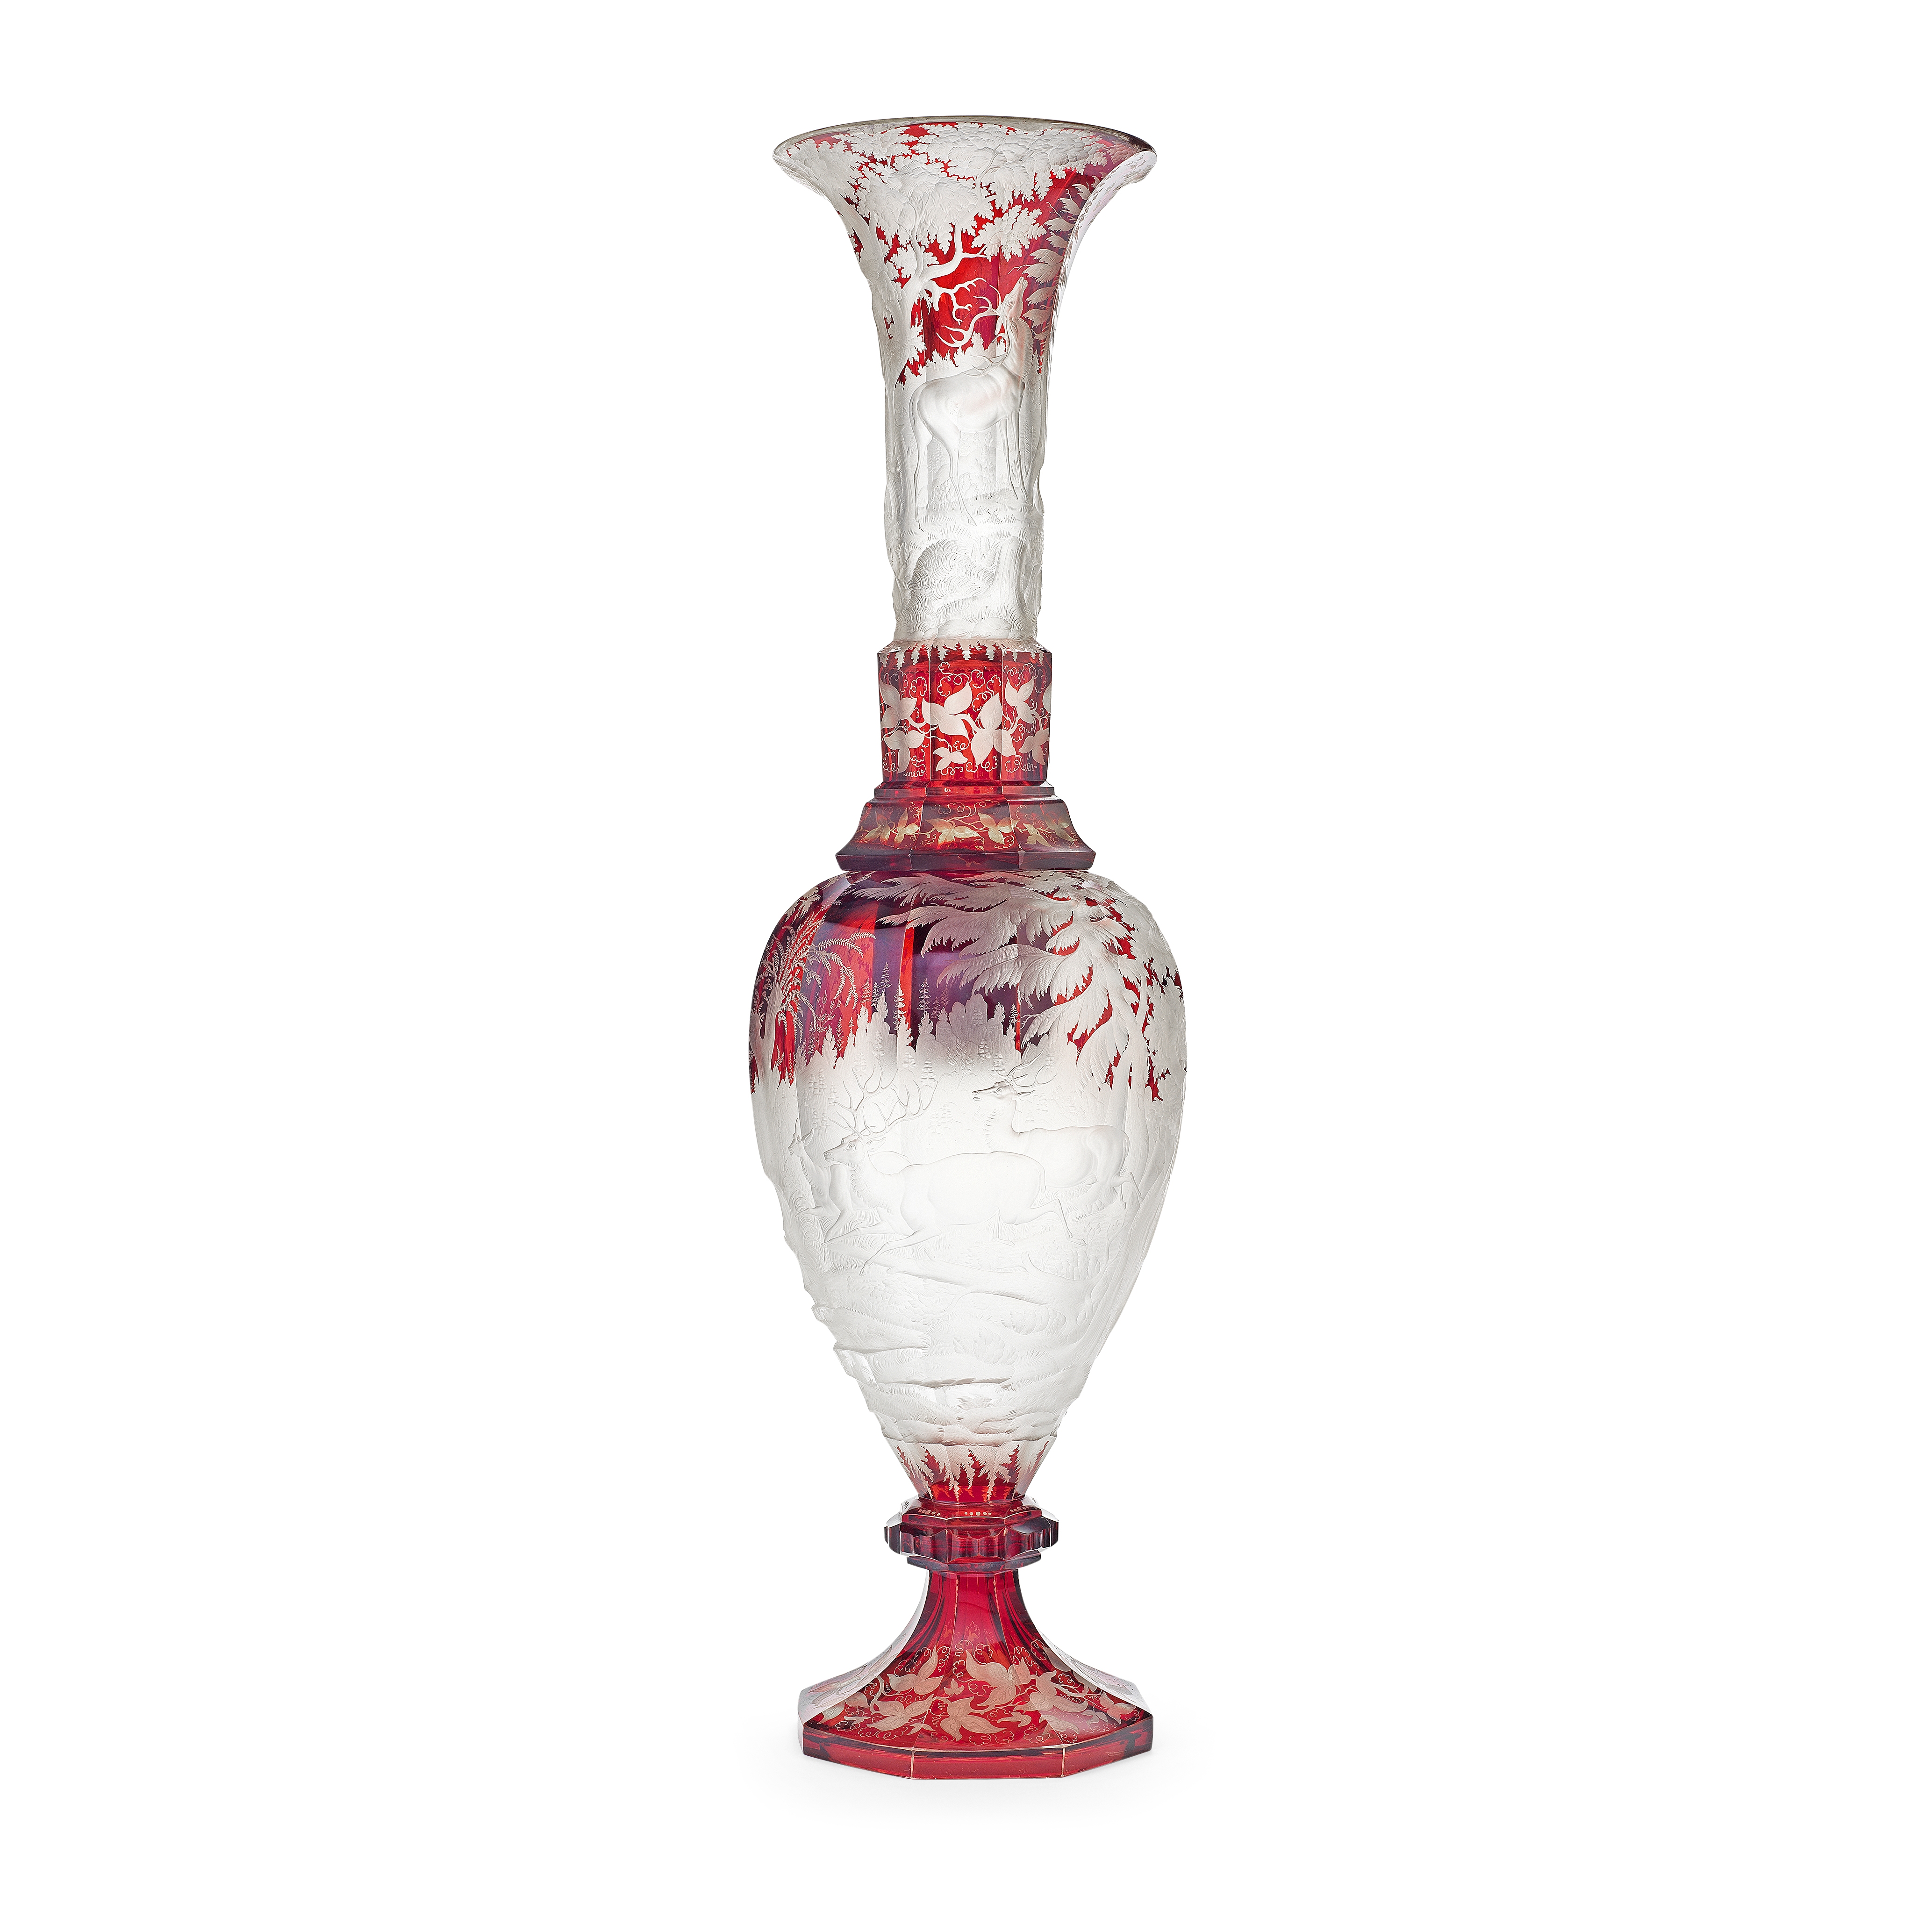 An impressive Bohemian ruby stained and engraved exhibition vase, circa 1850-60